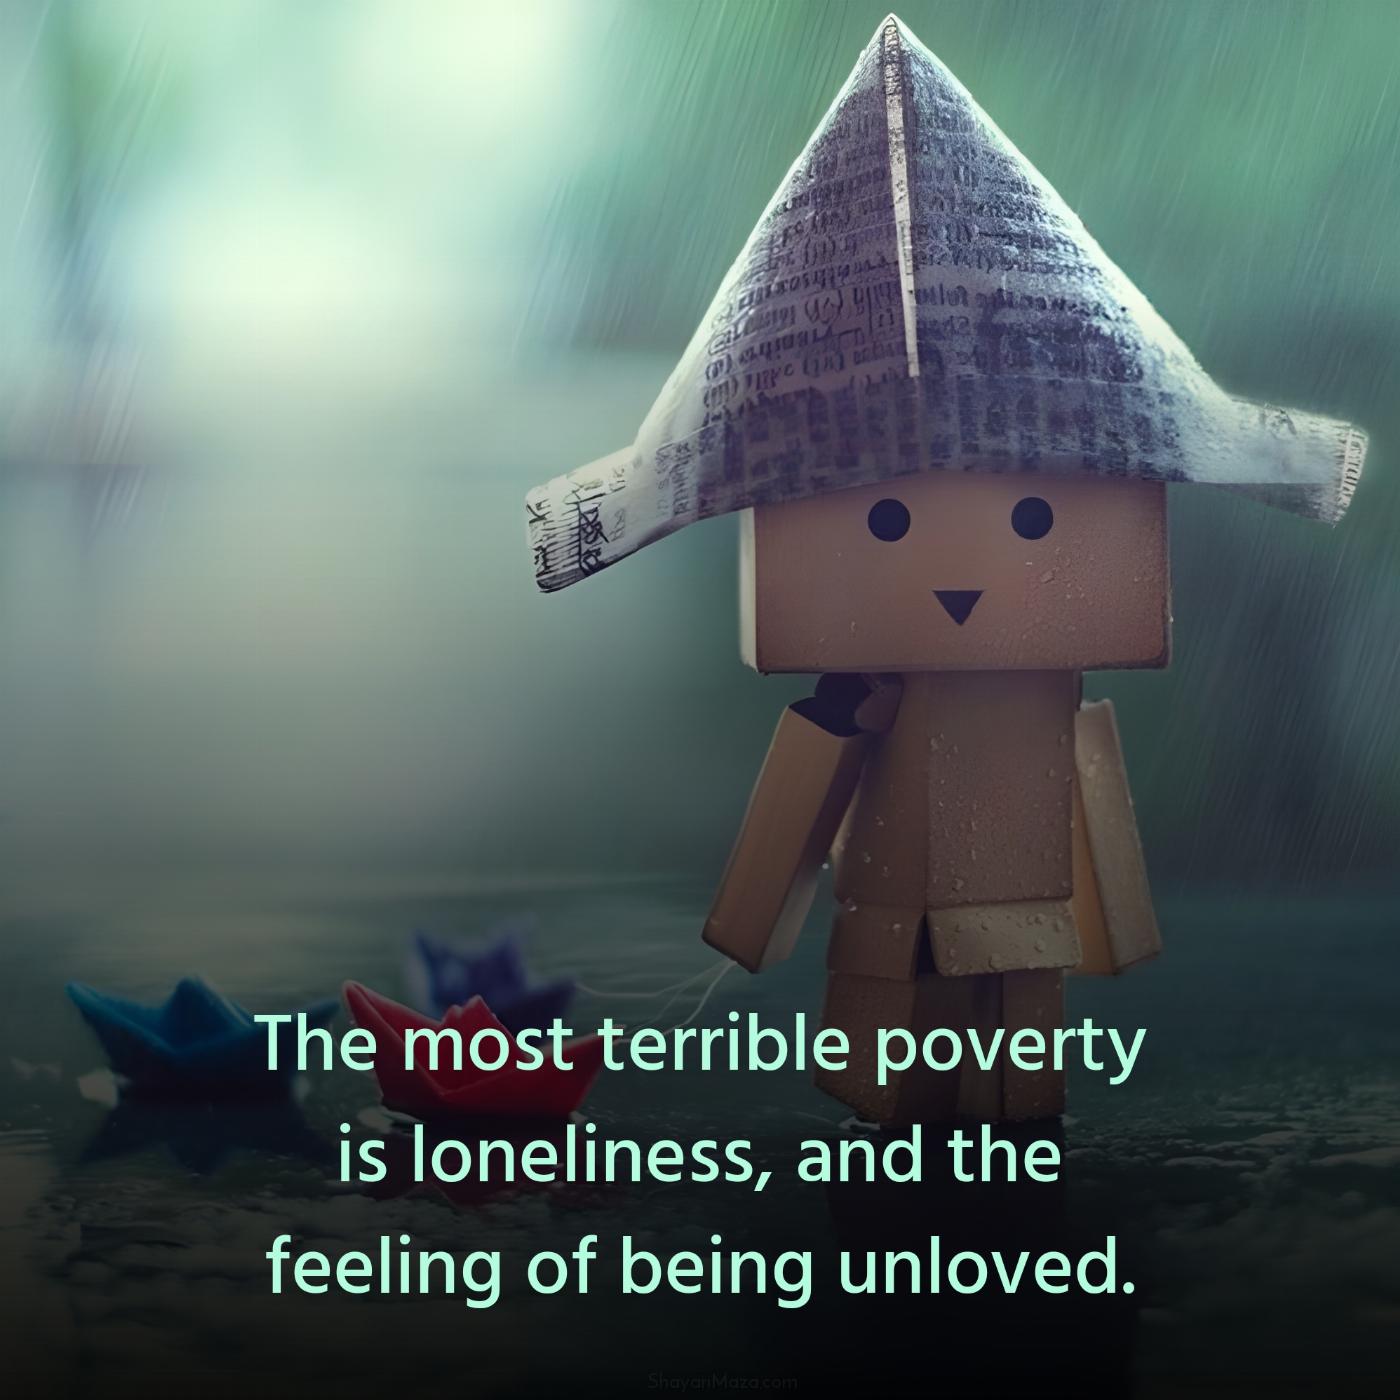 The most terrible poverty is loneliness